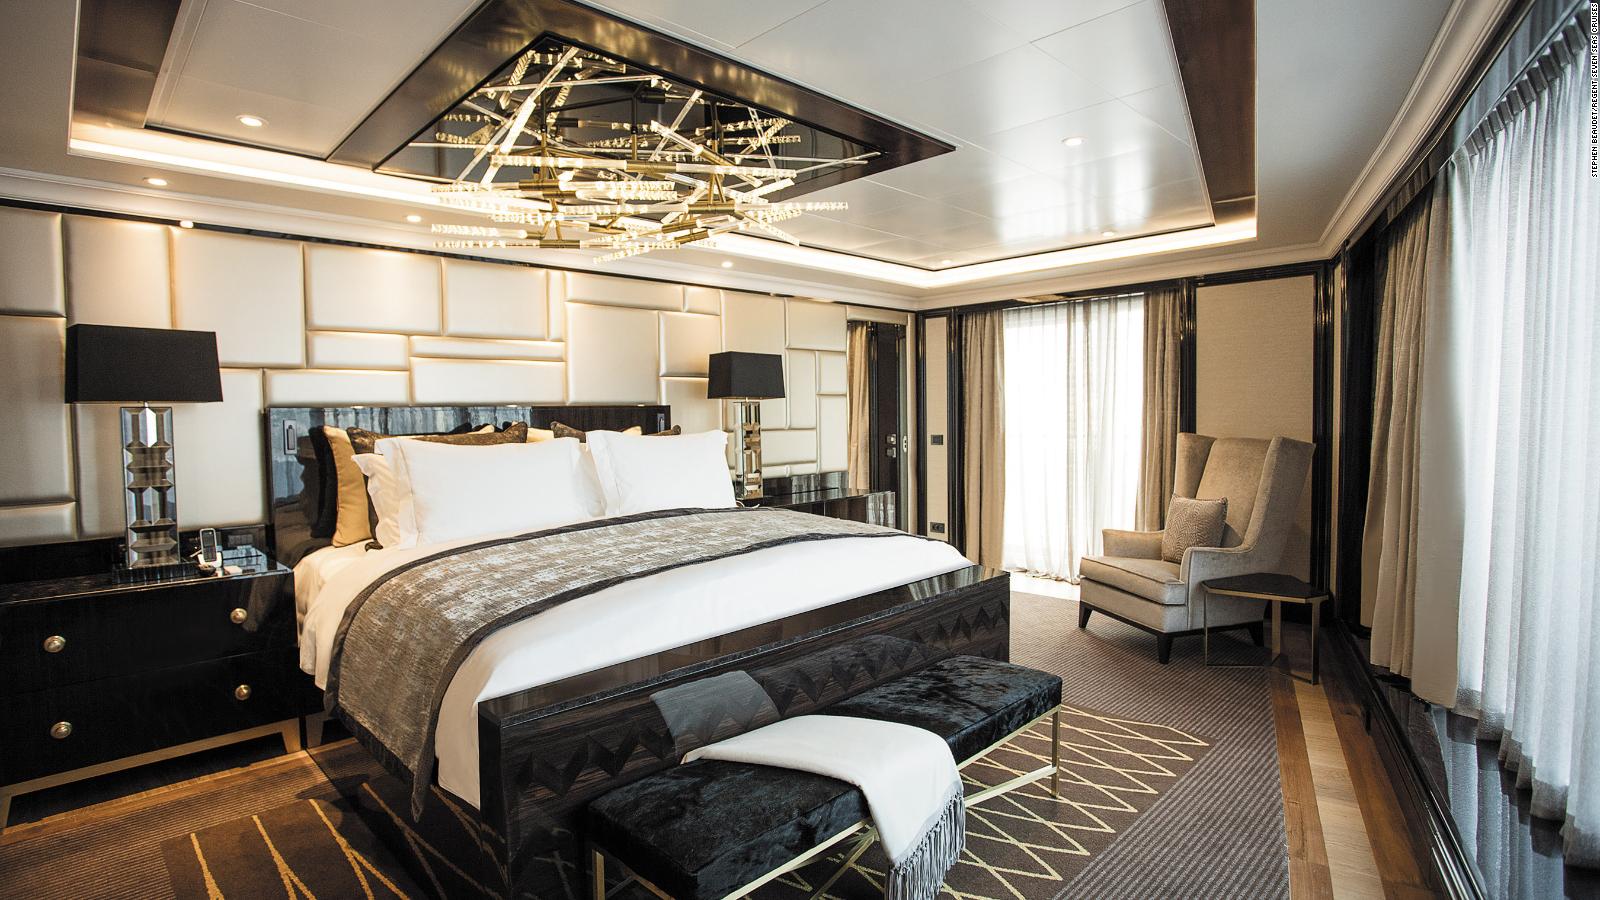 Luxury Suites On Cruise Ships Travel The Seas In Style